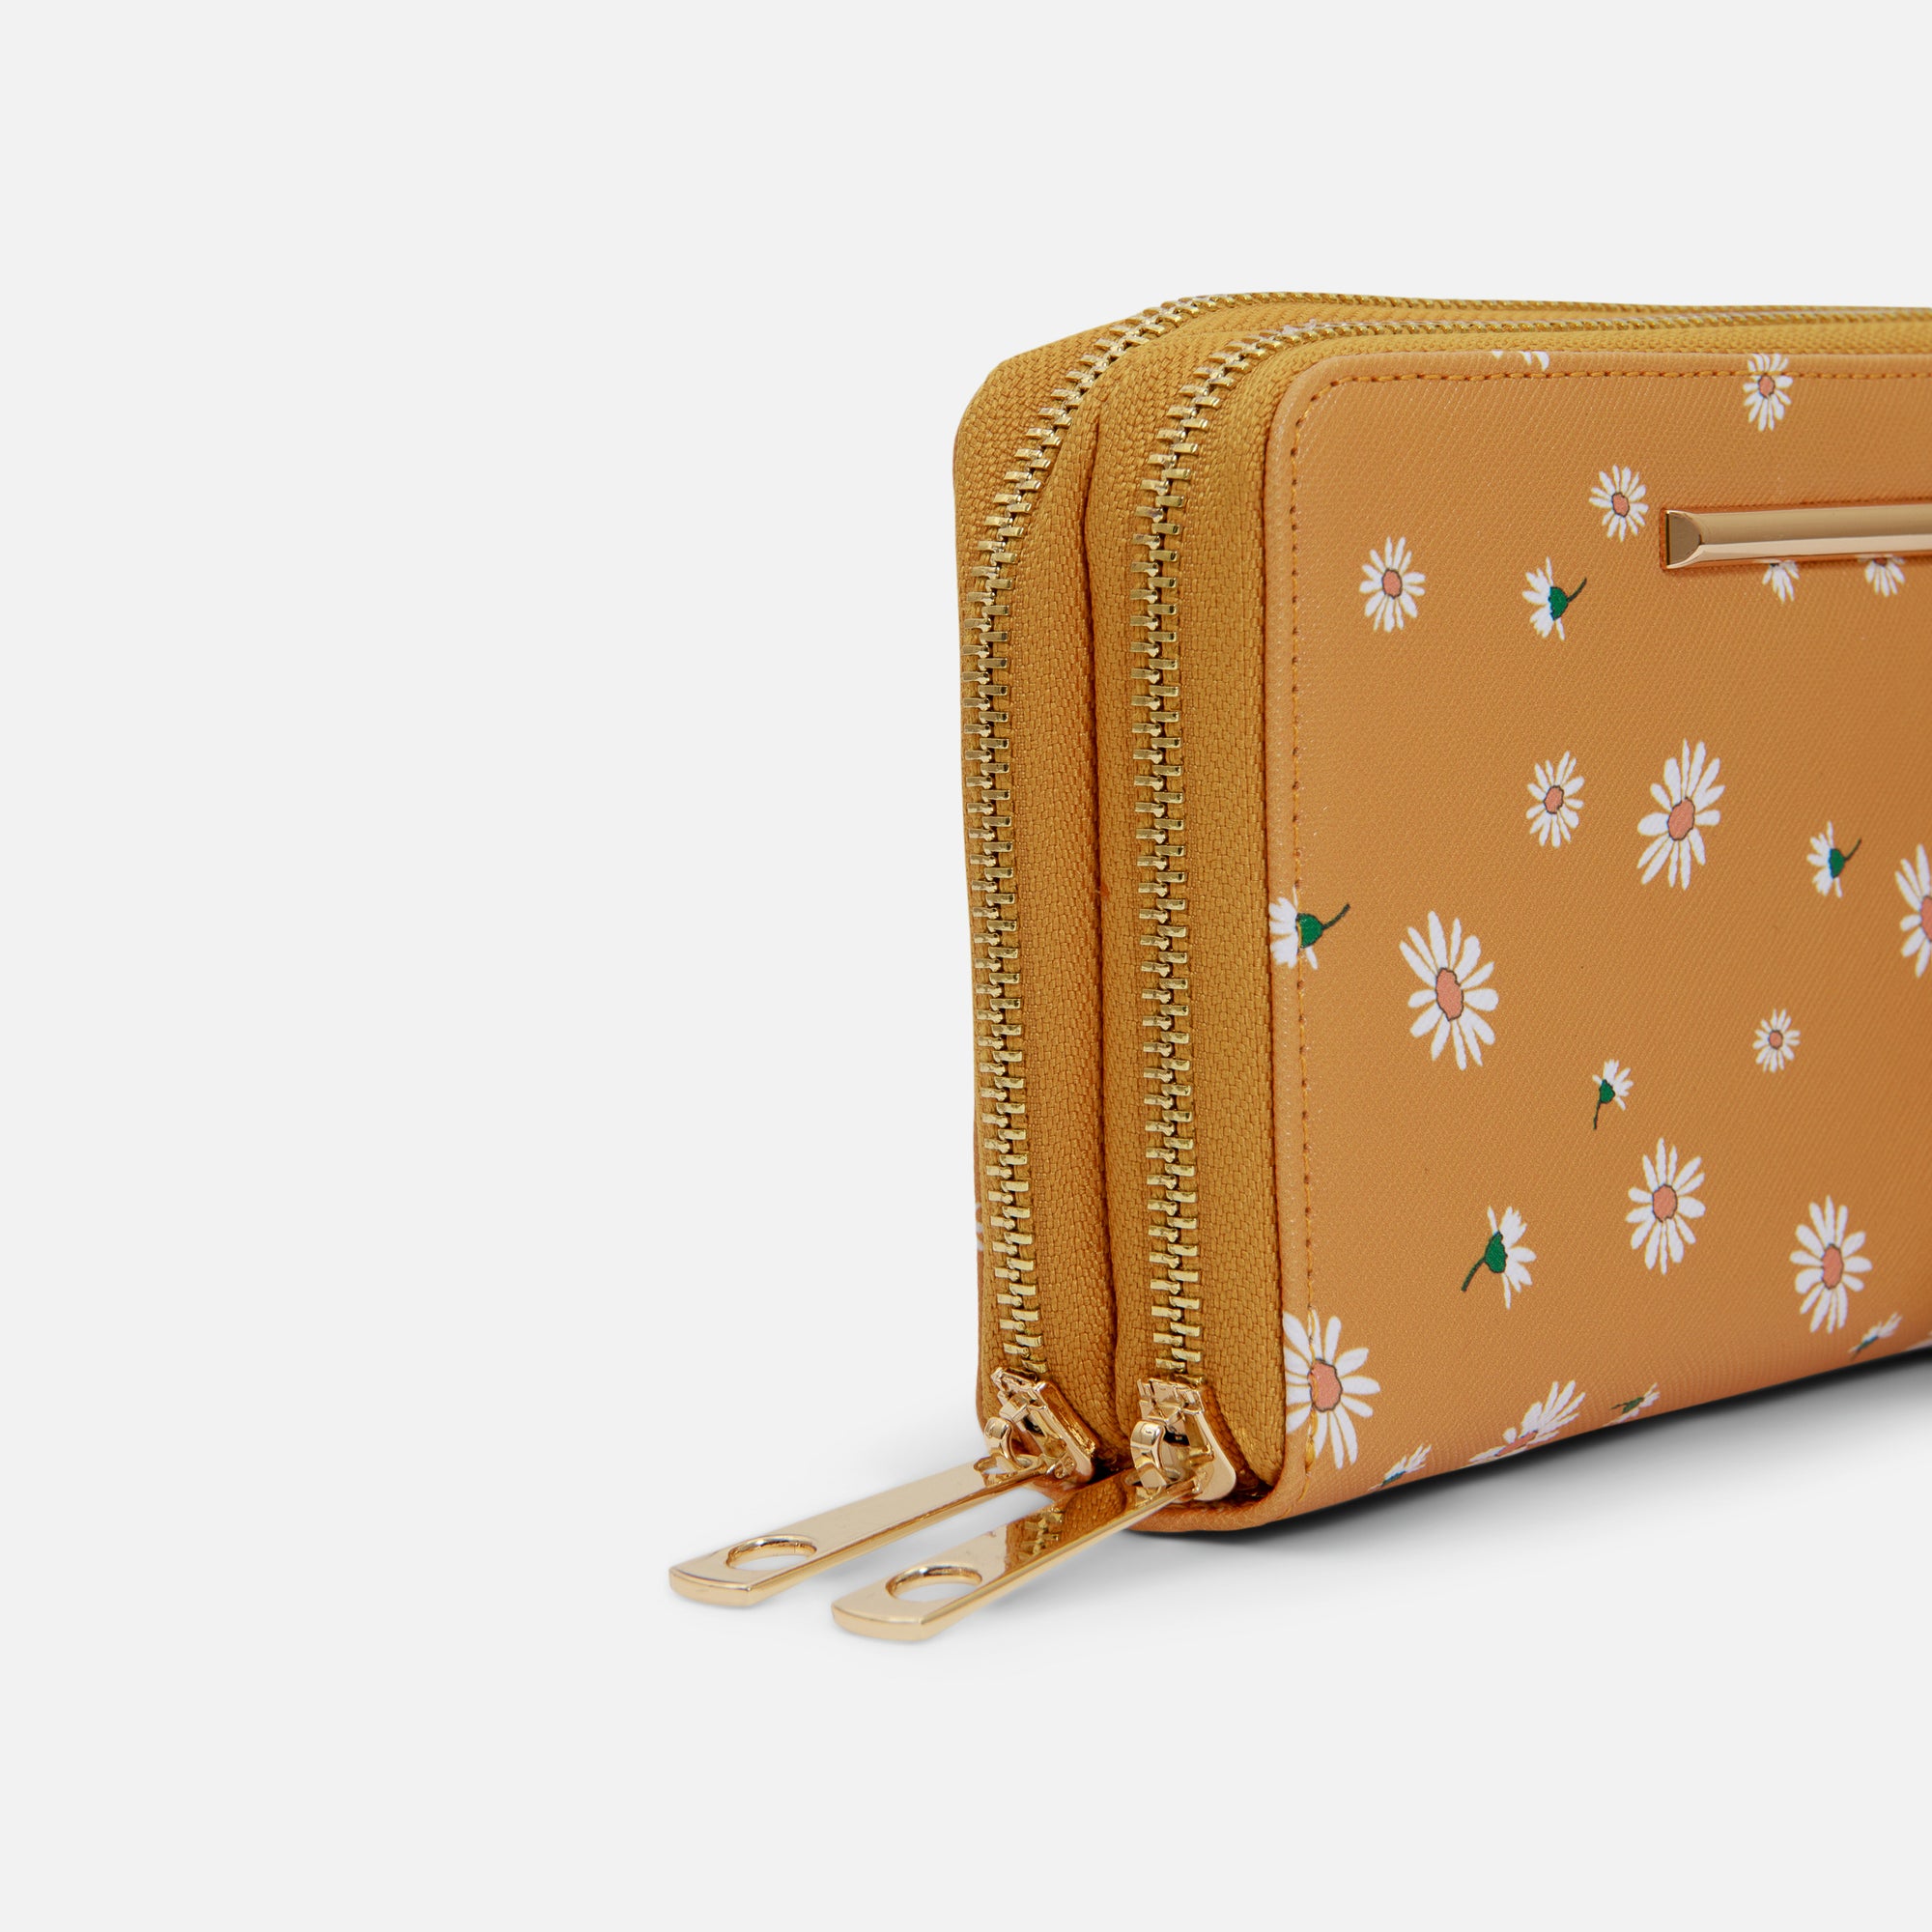 Double ocher wallet with golden details and white daisy print